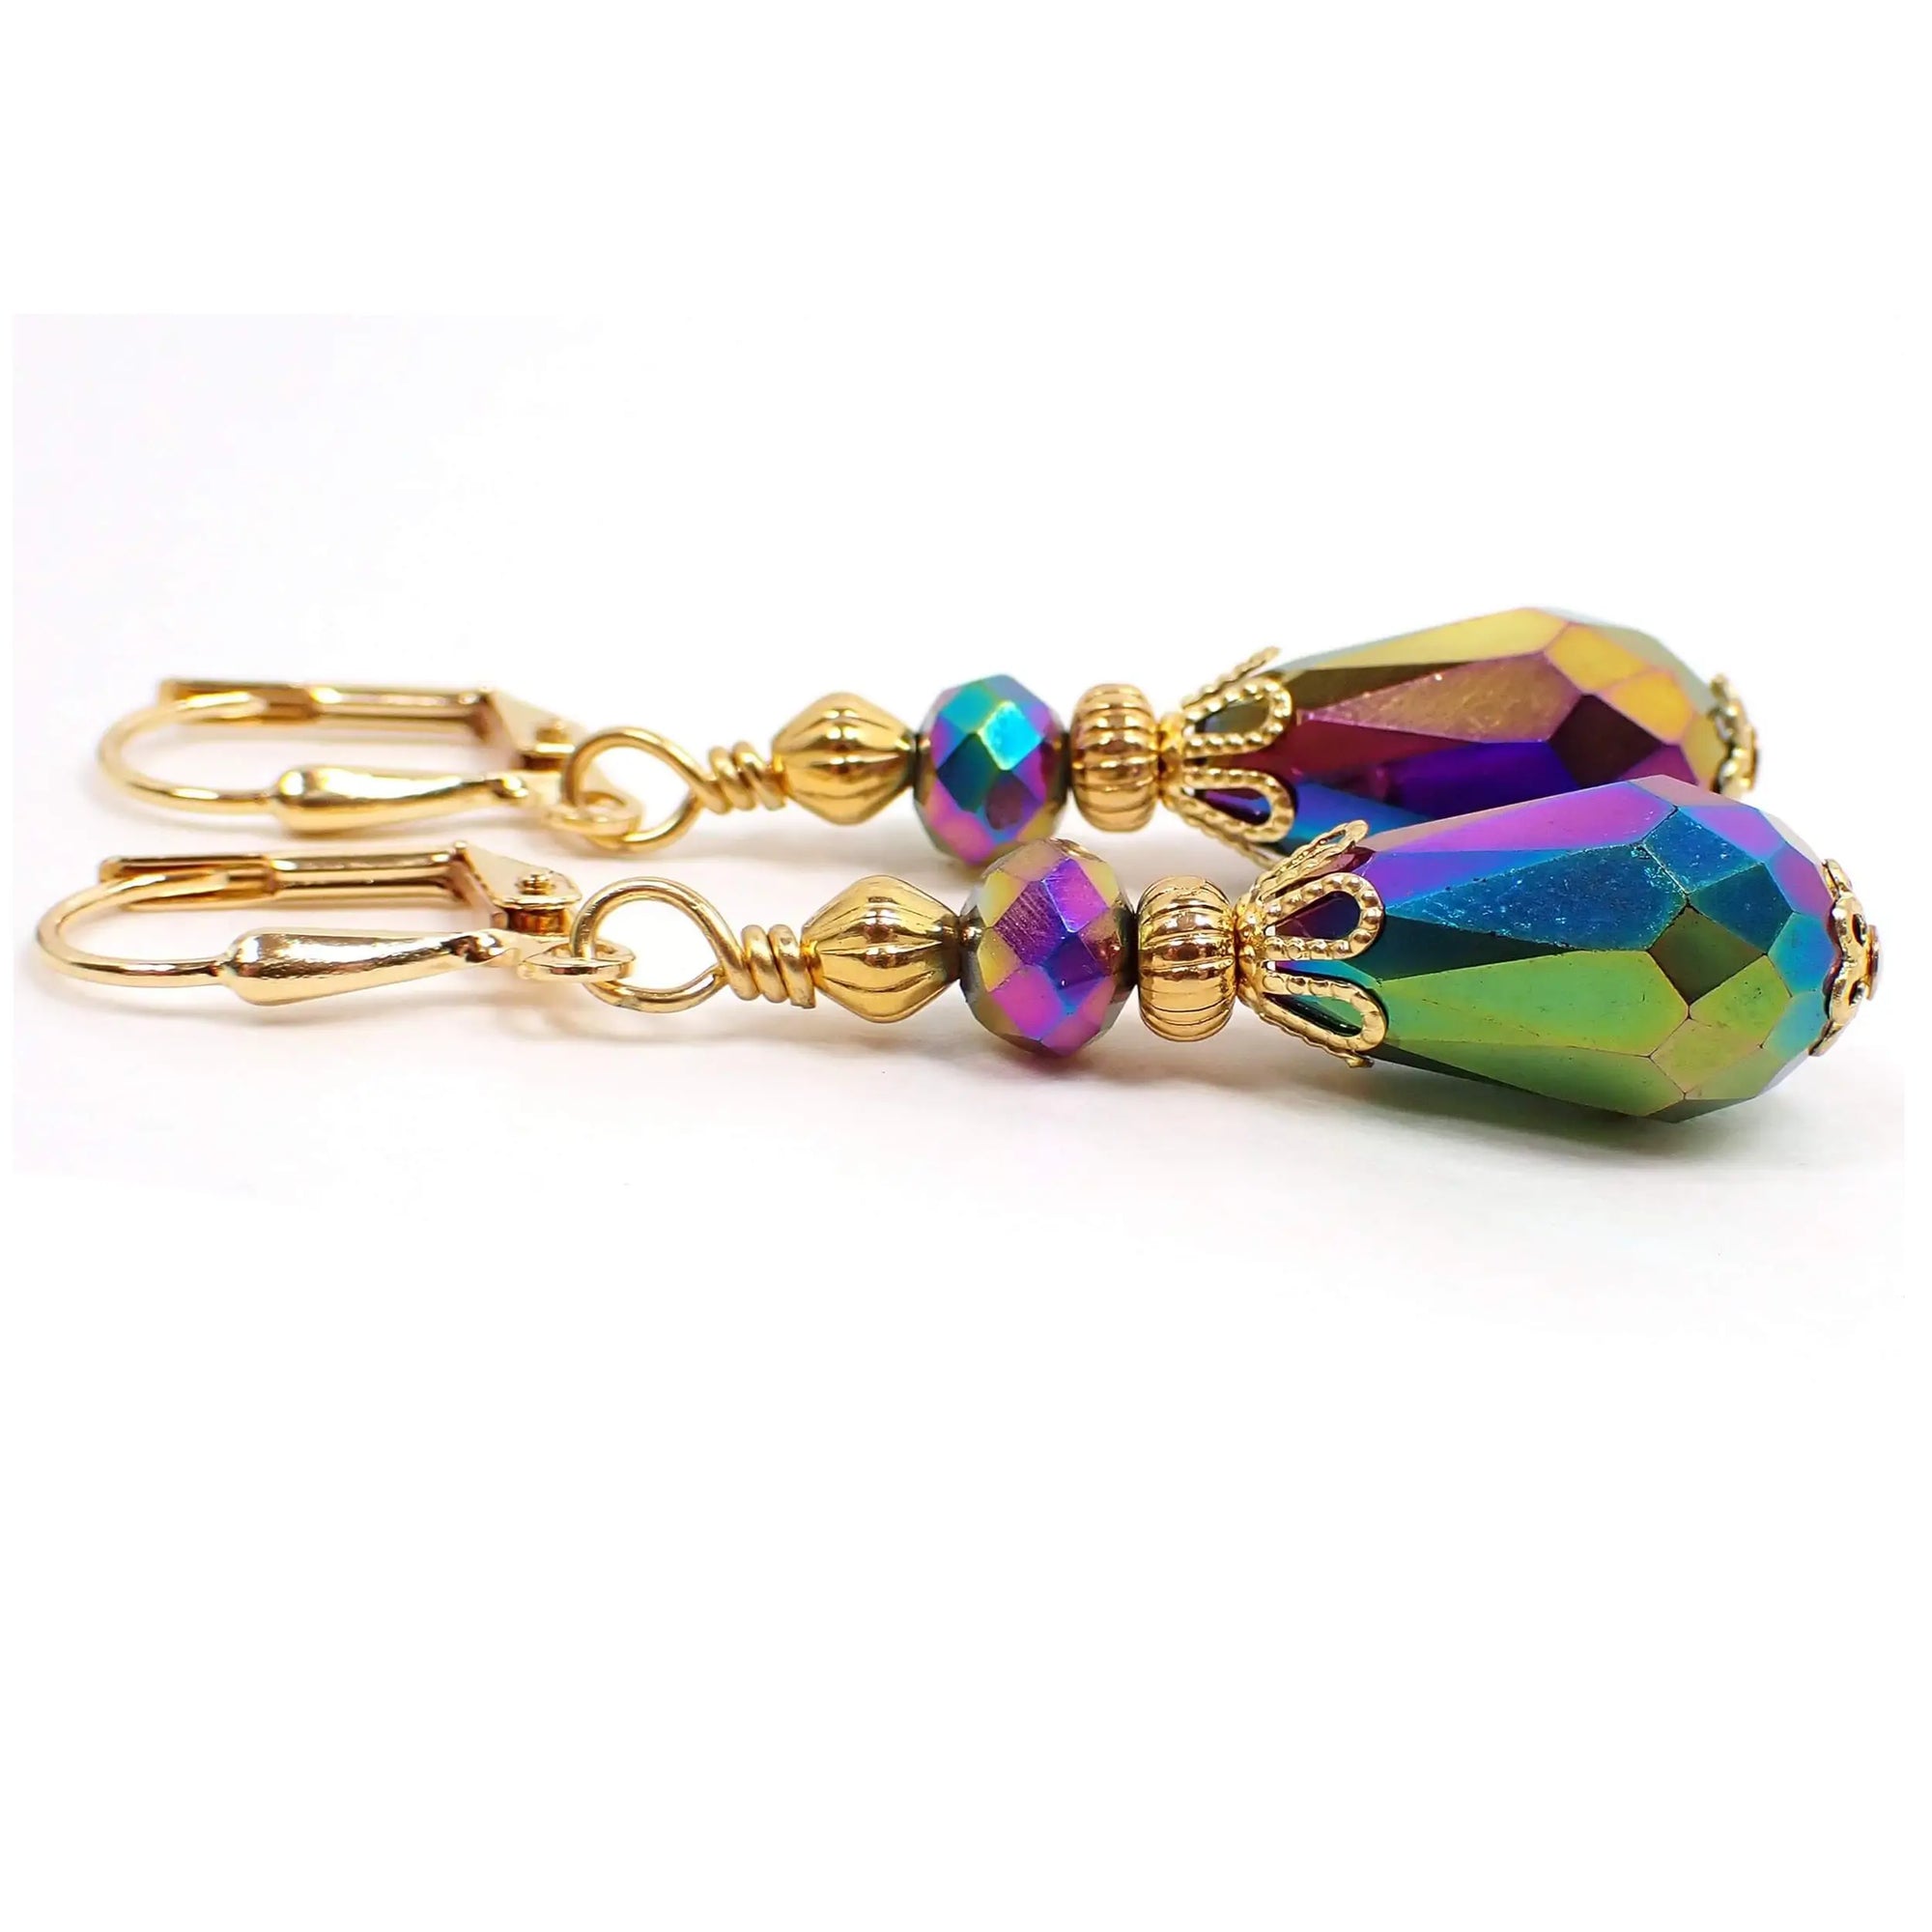 Side view of the handmade rainbow metallic multi color earrings. They have saucer shaped faceted glass beads at the top and faceted glass teardrop beads at the bottom. They colors are different as you rotate around the beads in pink, blue, purple, and yellow. The metal is gold plated color.